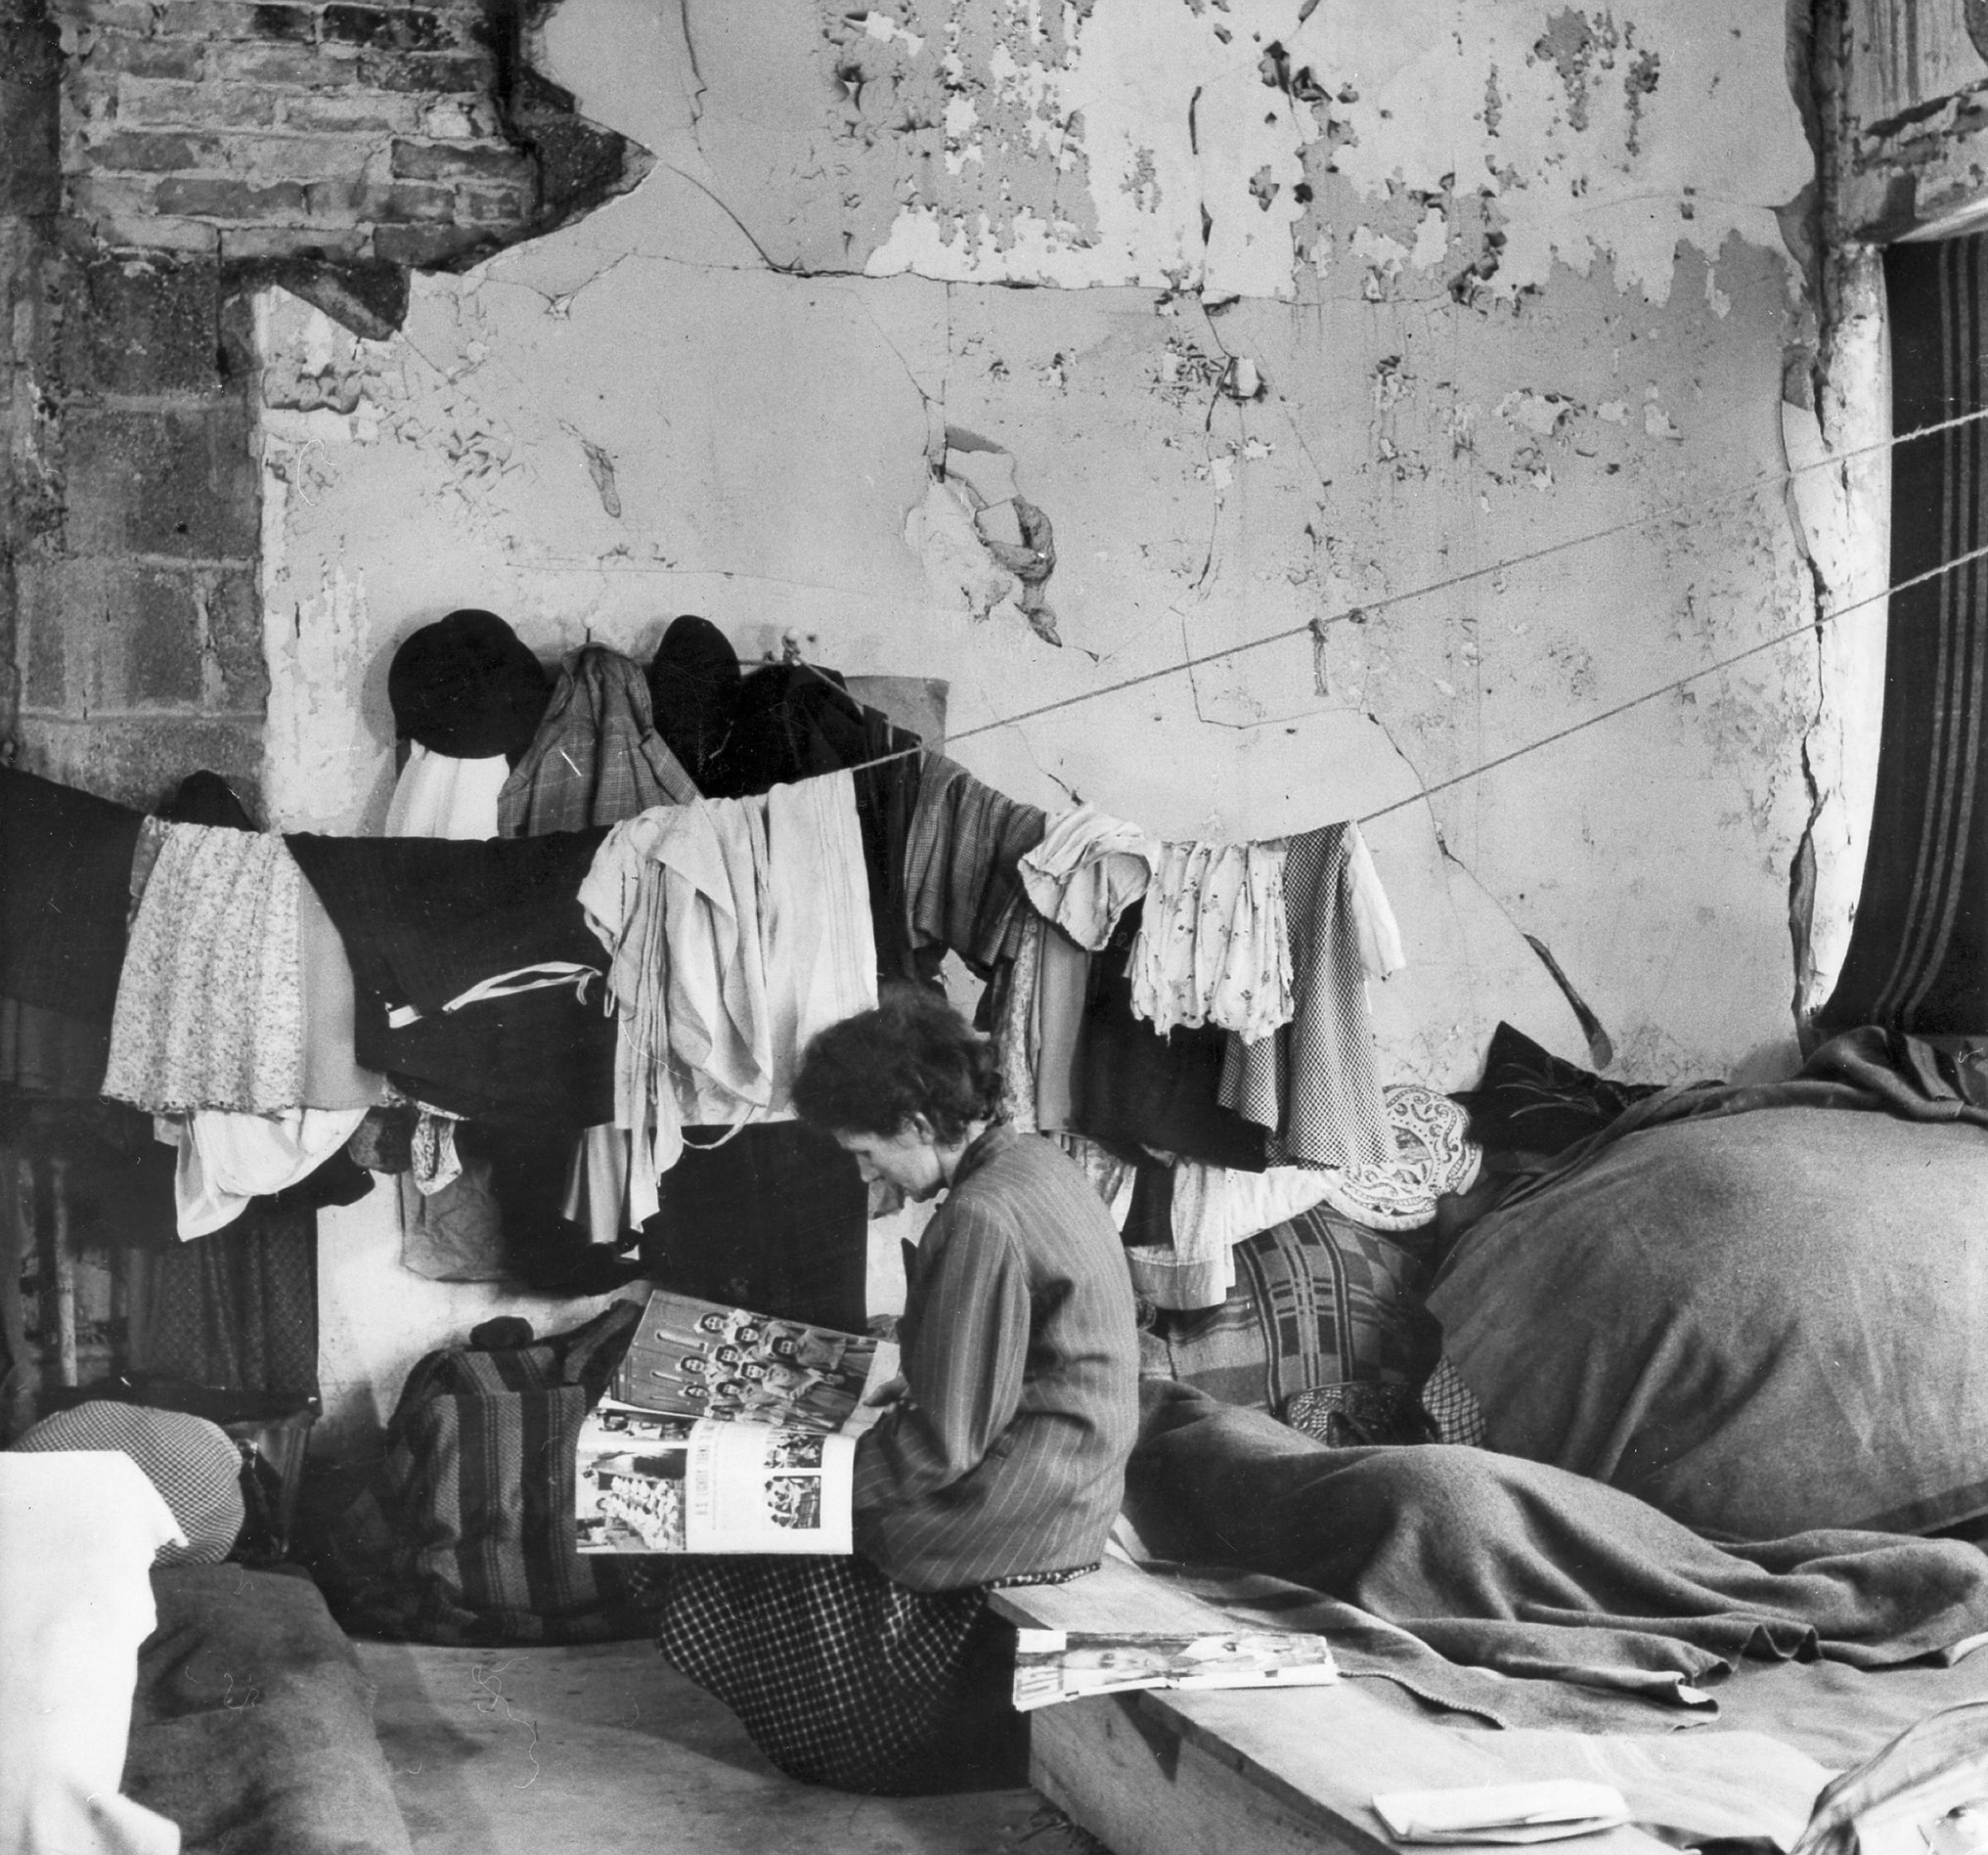 A woman reads a magazine in an emergency accommodation for refugees, around 1945.